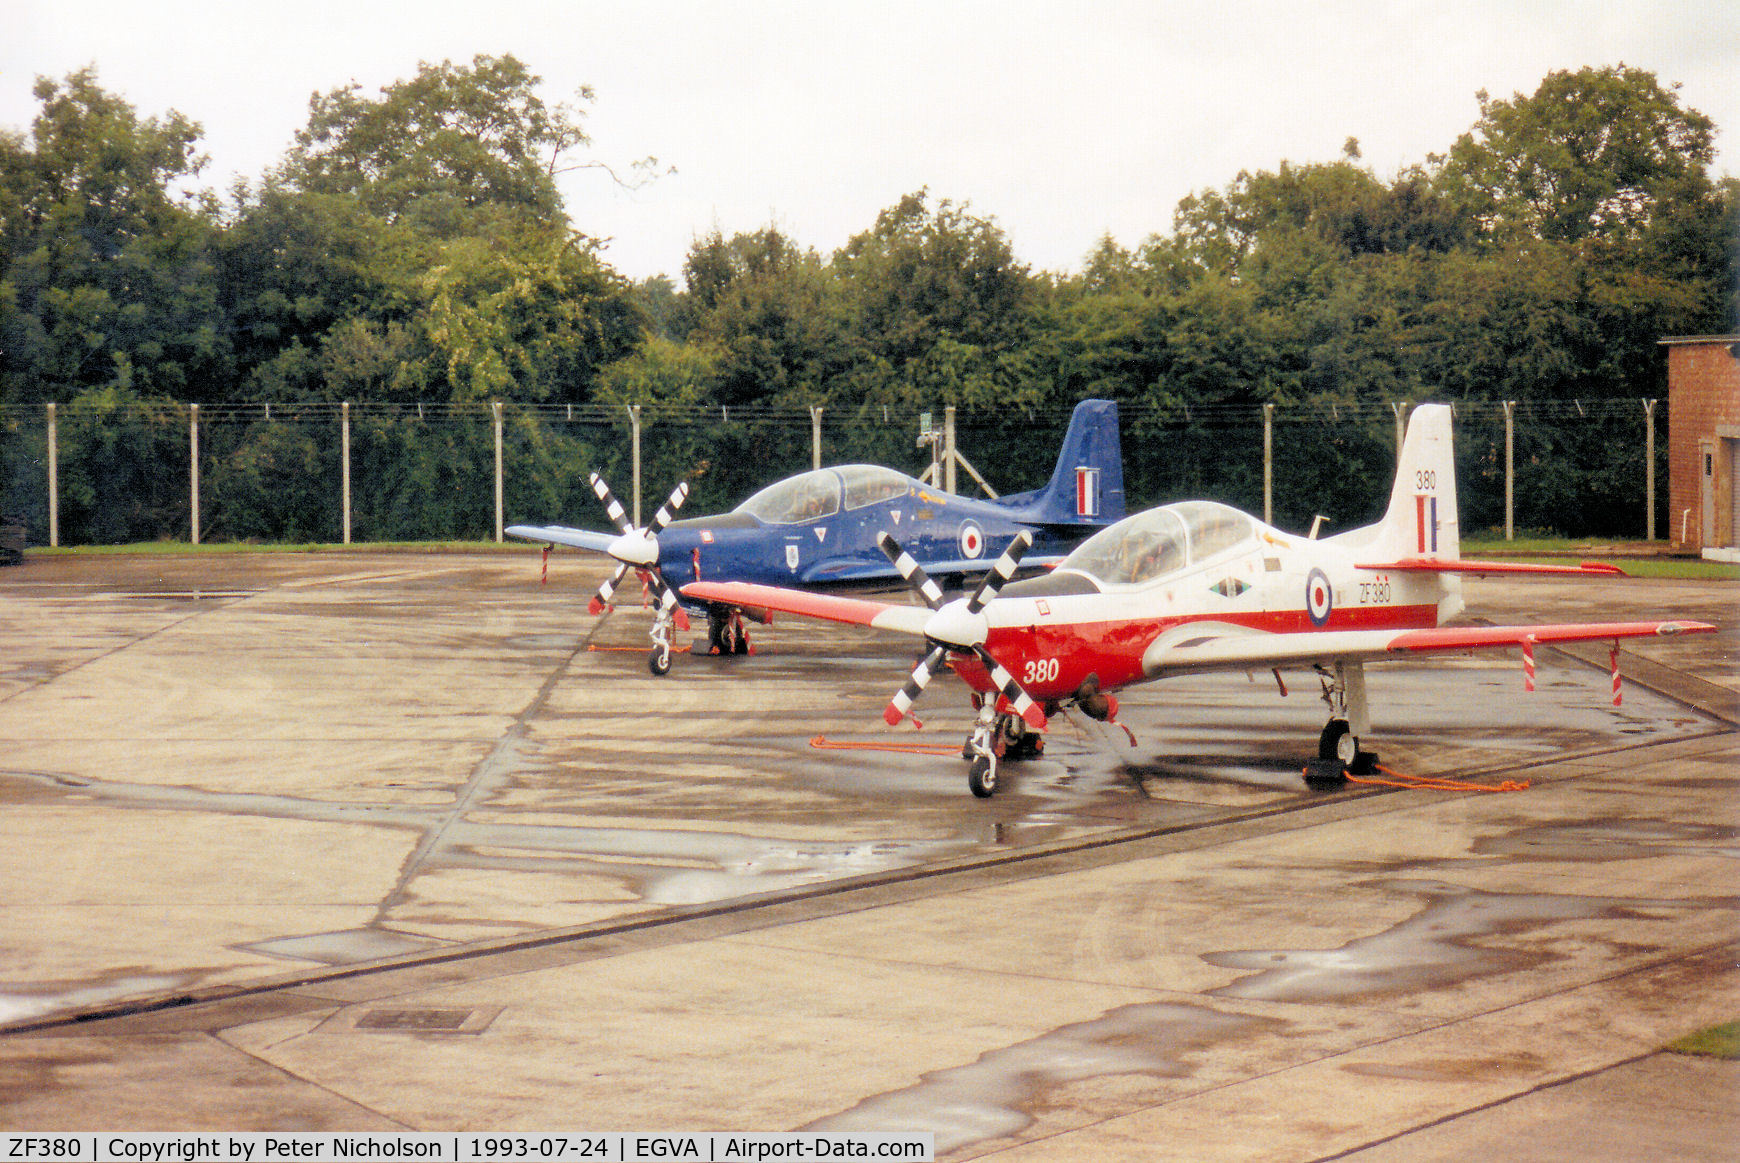 ZF380, 1992 Short S-312 Tucano T1 C/N S123/T94, Tucano T.1, callsign Rivet 1, of the Central Flying School with companion ZF 406 on the flight-line at the 1993 Intnl Air Tattoo at RAF Fairford.